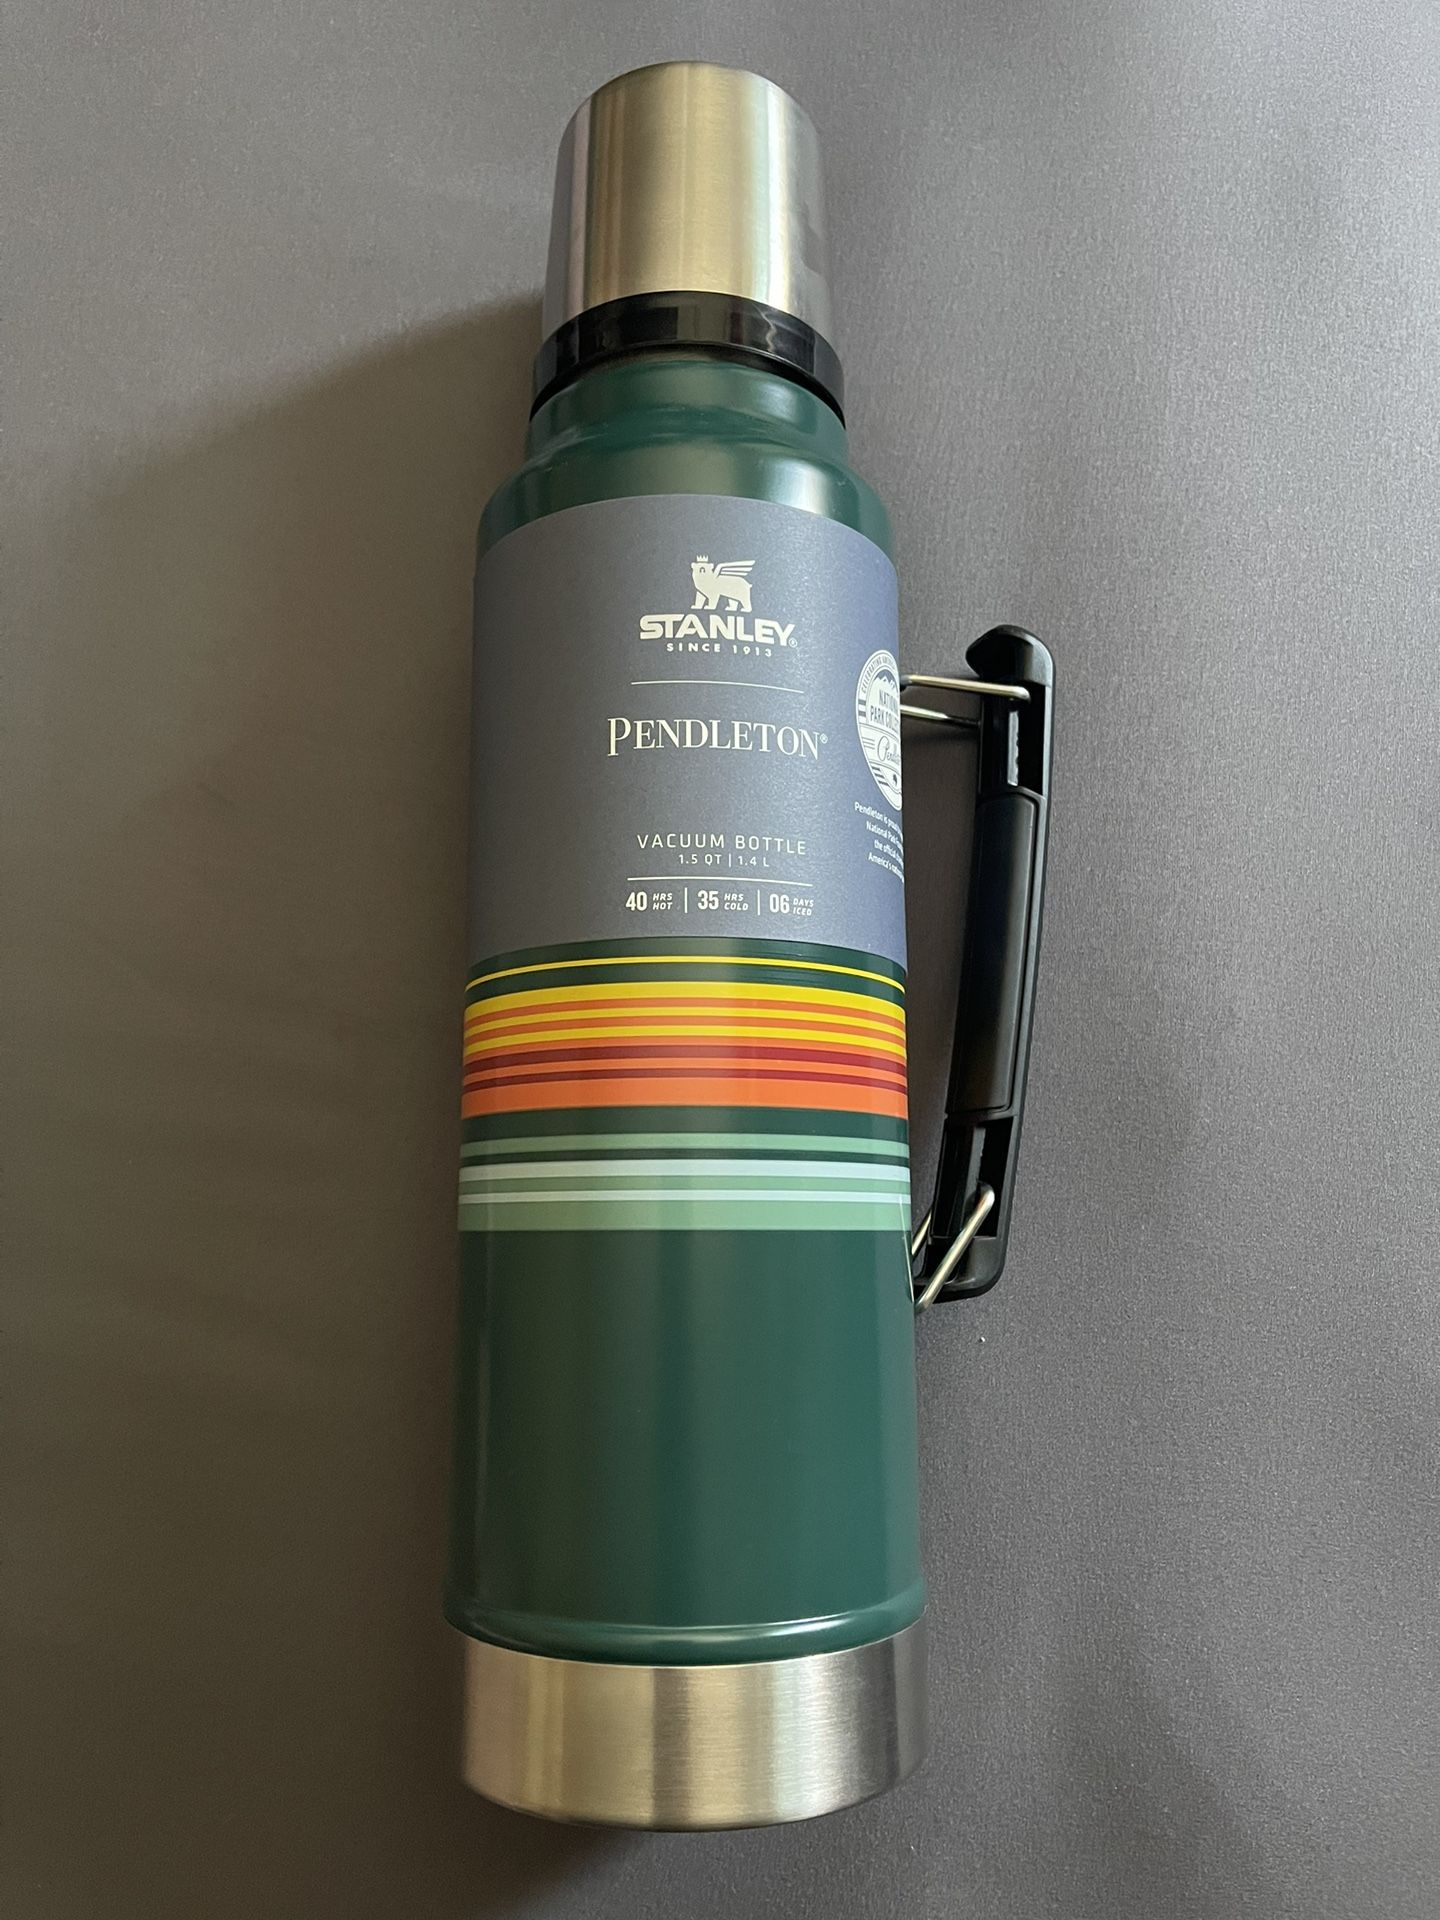 Pendleton Stanley Thermos Vacuum Bottle Lid is Cup Hot Cold, 1.5qt/1.4L,  Green for Sale in Beverly Hills, CA - OfferUp